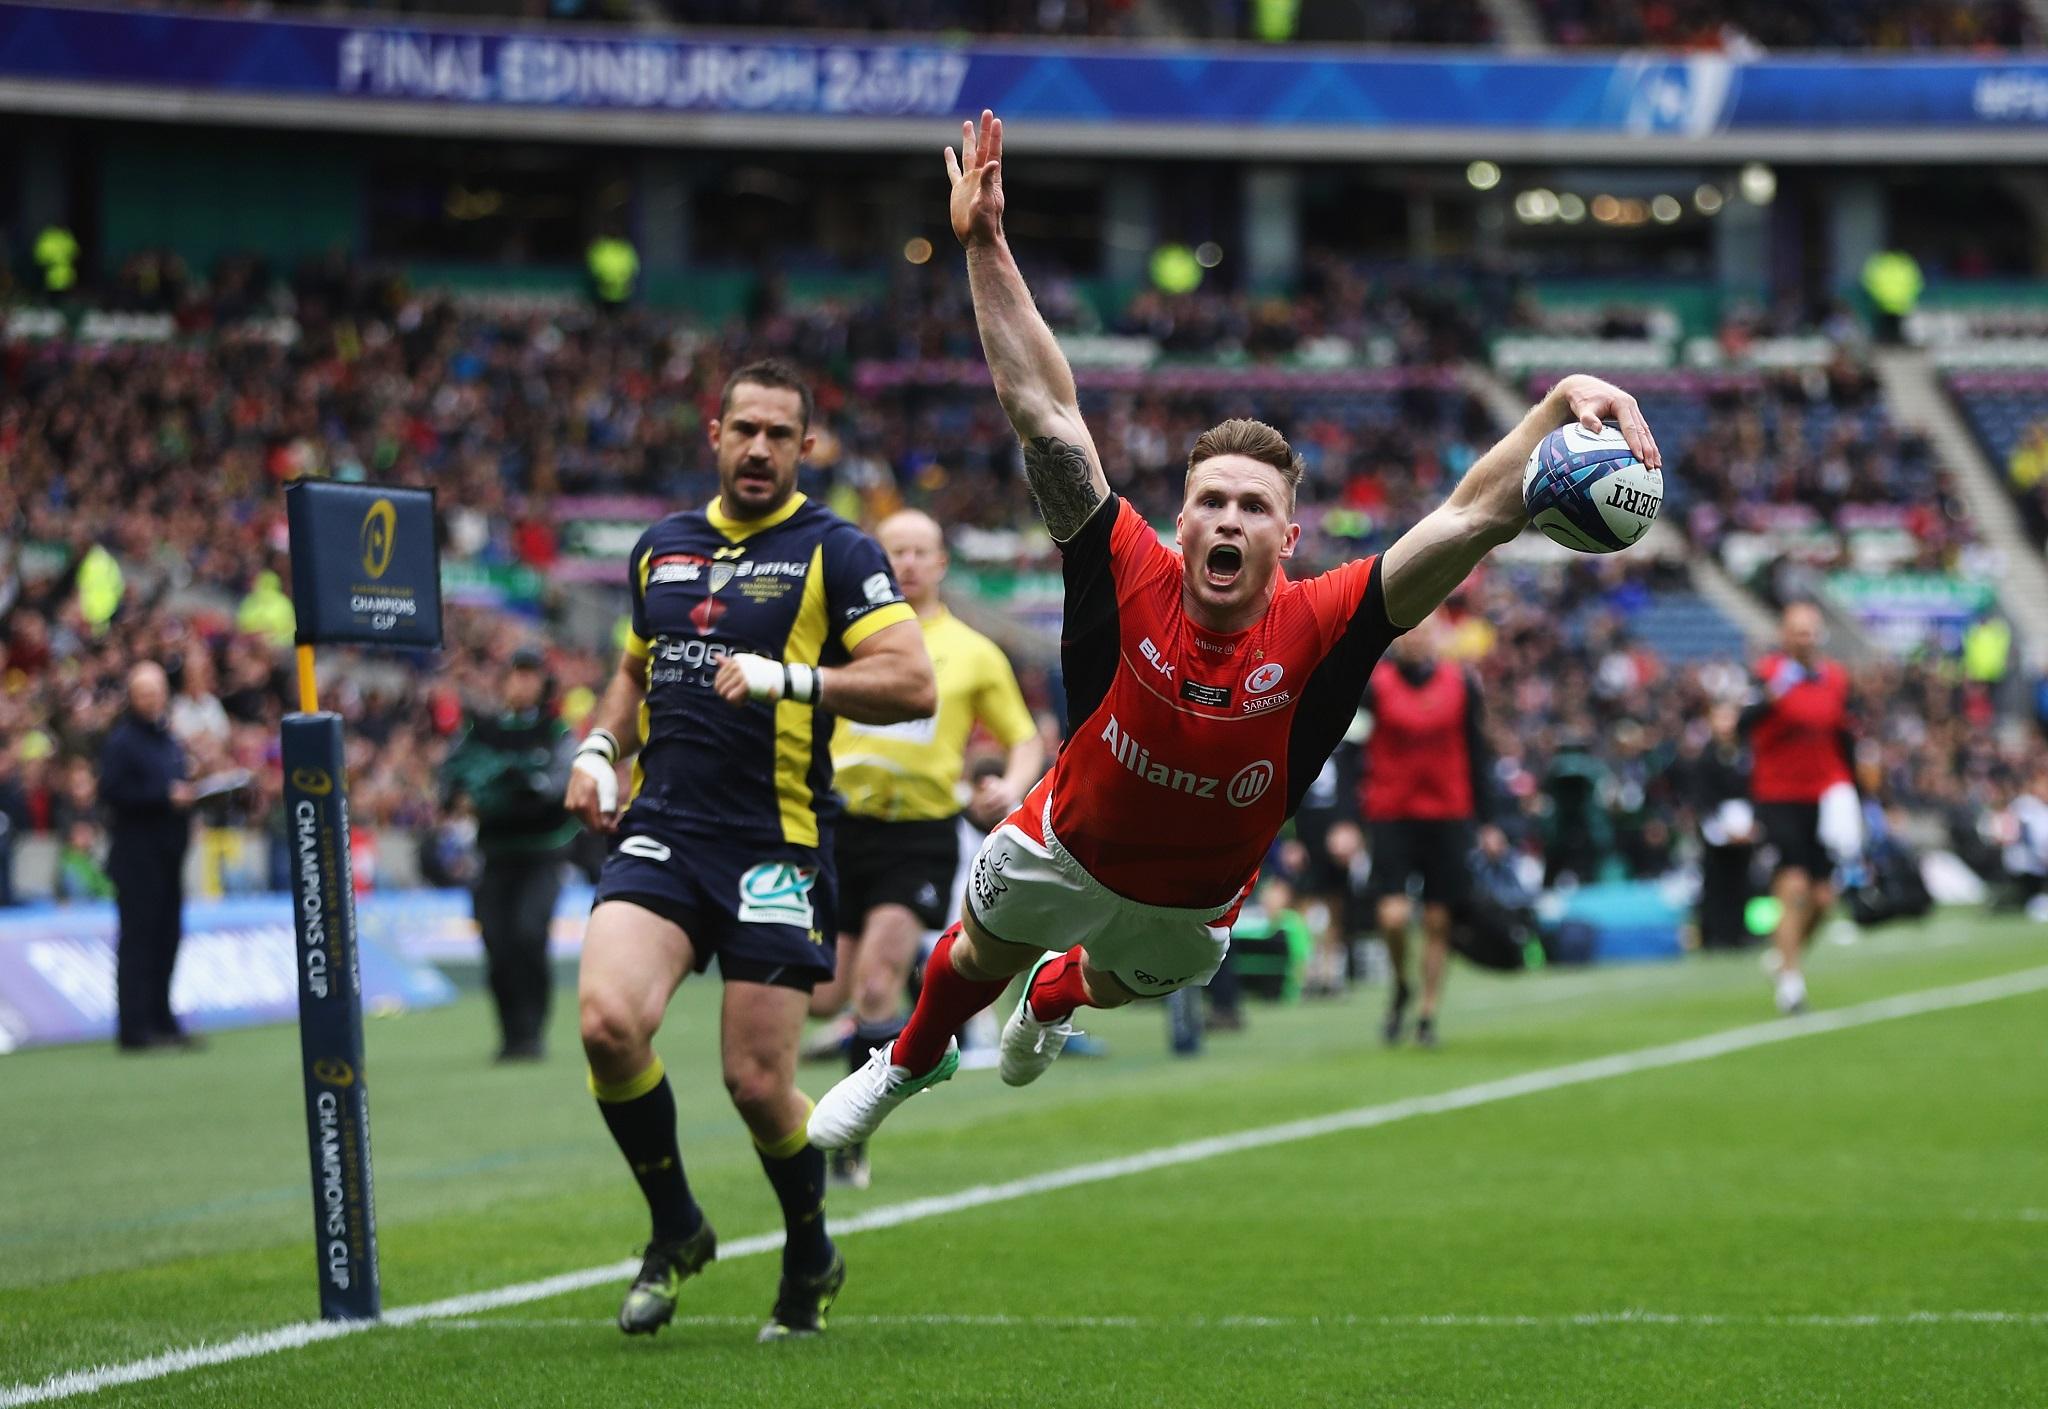 Chris Ashton dives over for his record-breaking 37th try in European rugby